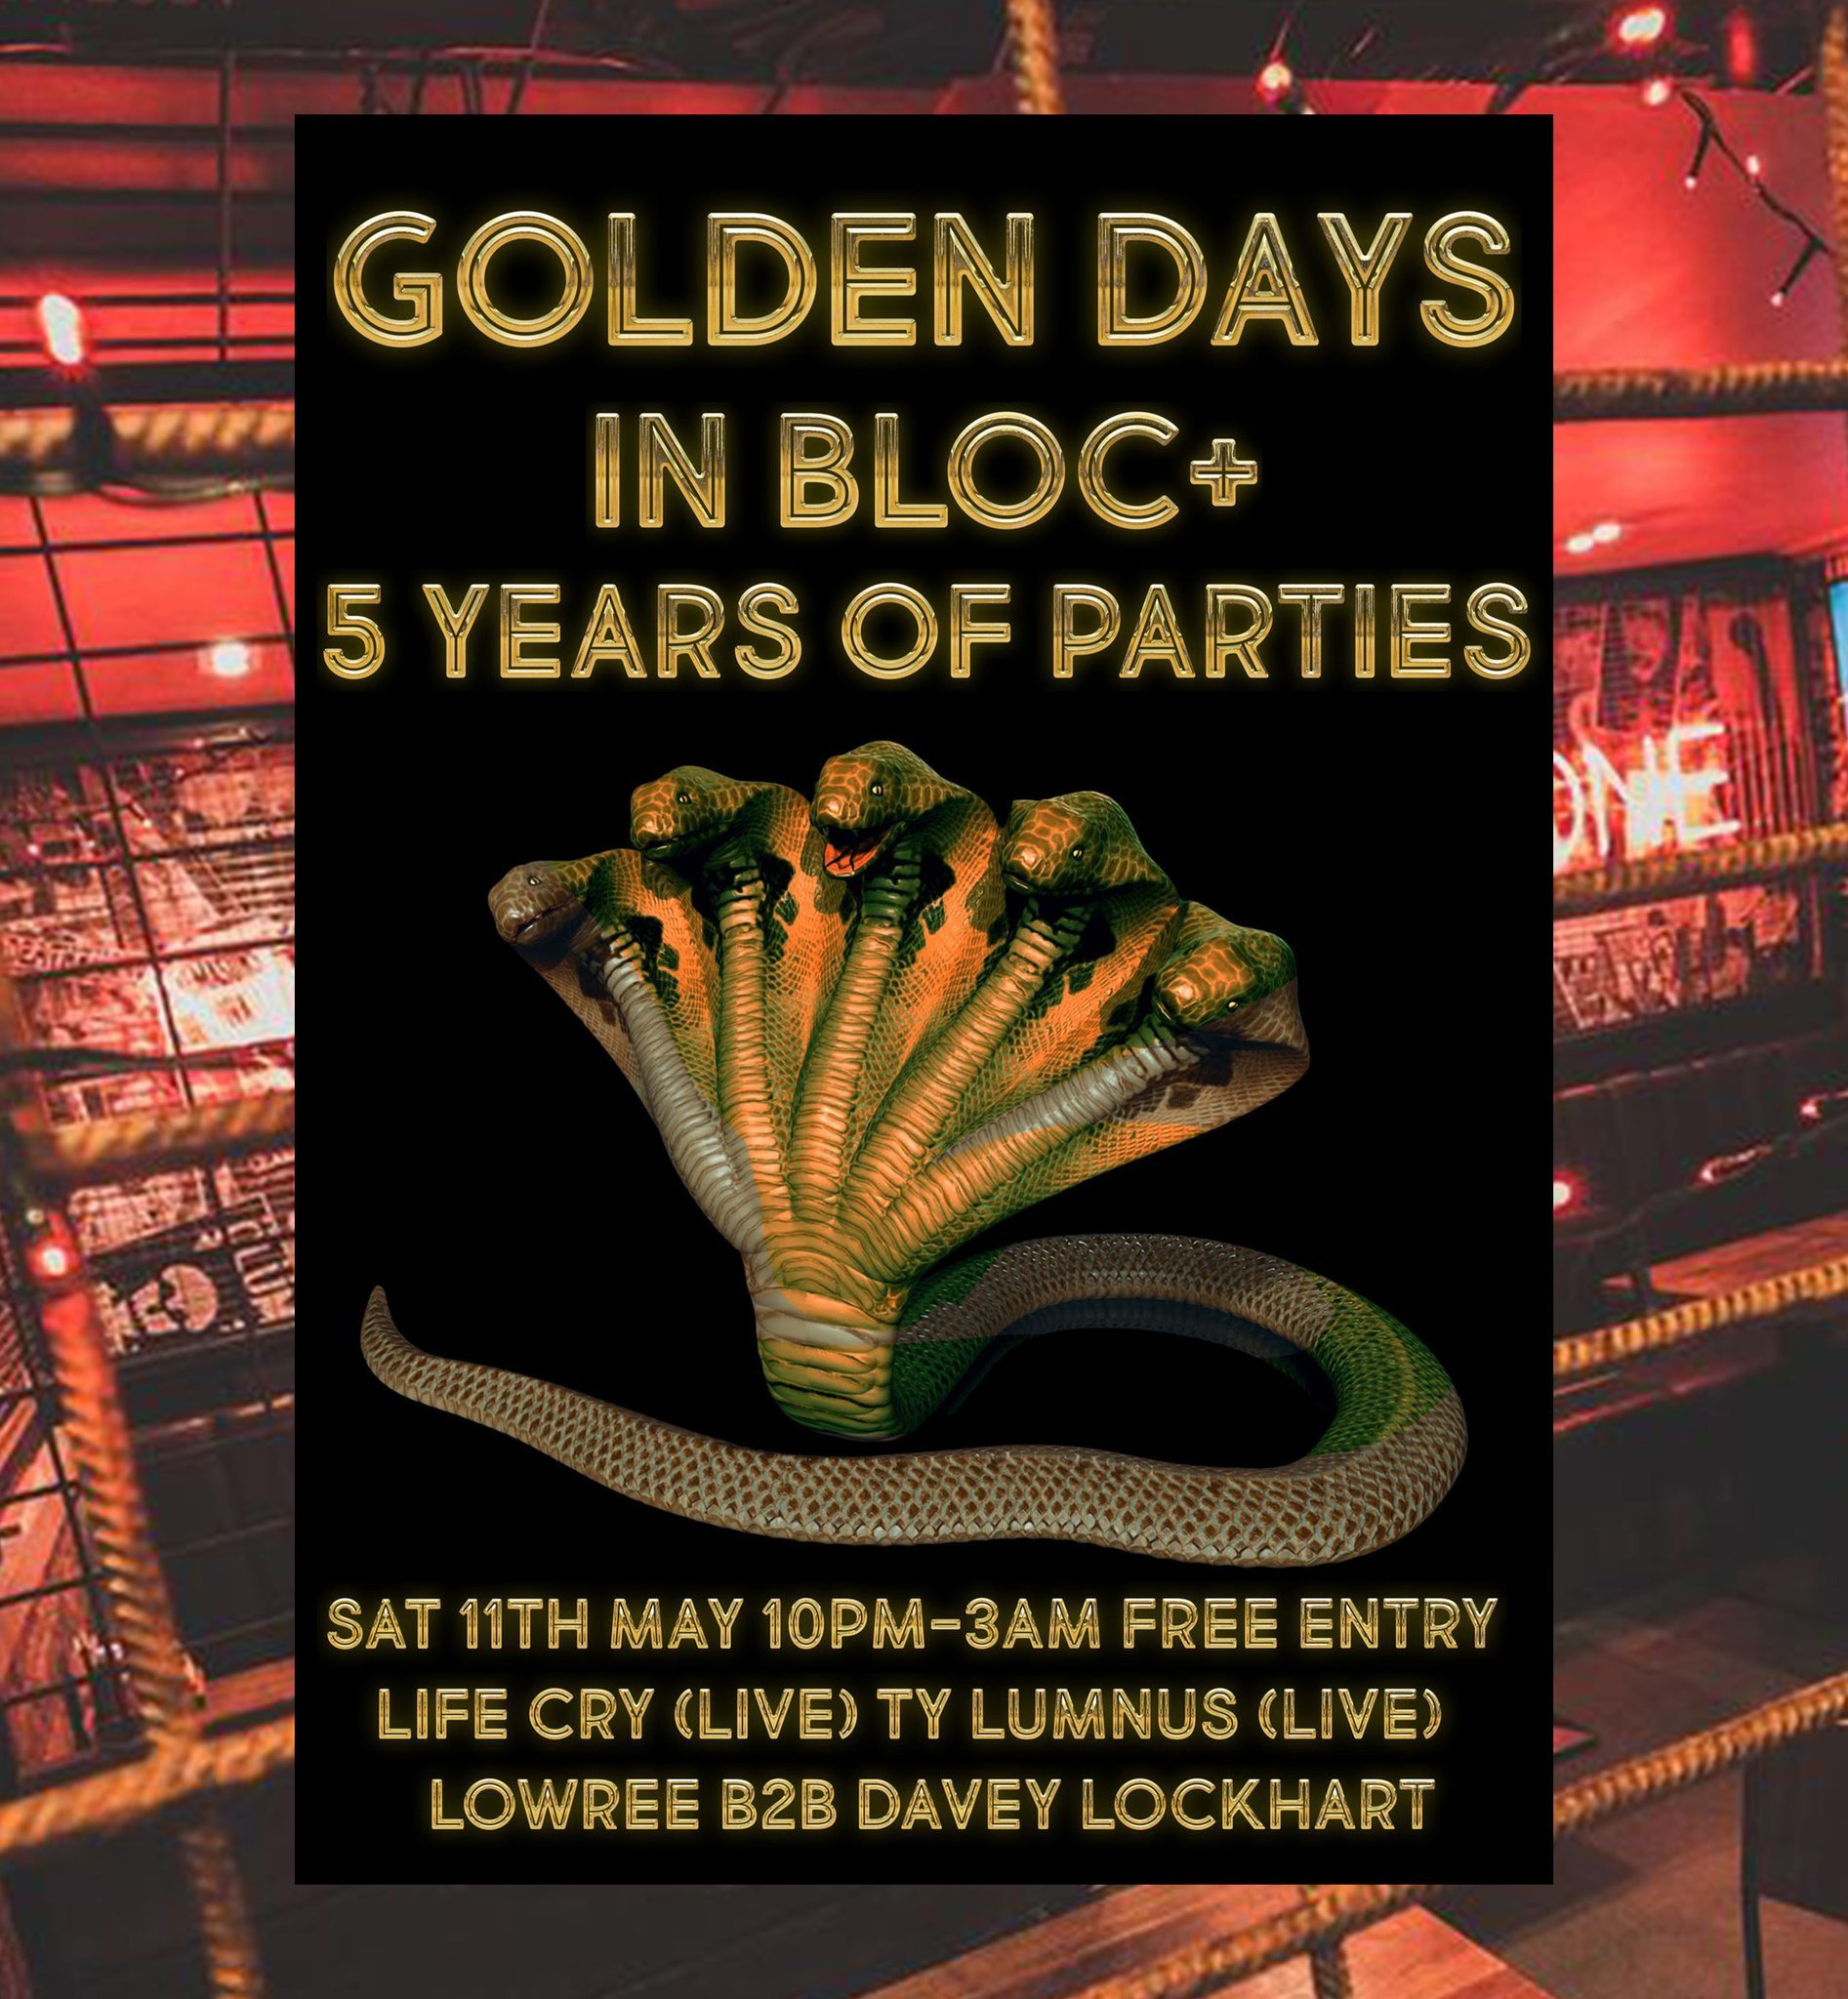 🎉 Join us in celebrating 5 years of GOLDEN DAYS at Bloc+ THIS SATURDAY! 🎶

From mind-bending beats to soul-shaking rhythms, @goldendaysglasgow has been the ultimate genre-bending dance party for half a decade! 🌟

Featuring live performances by Lif